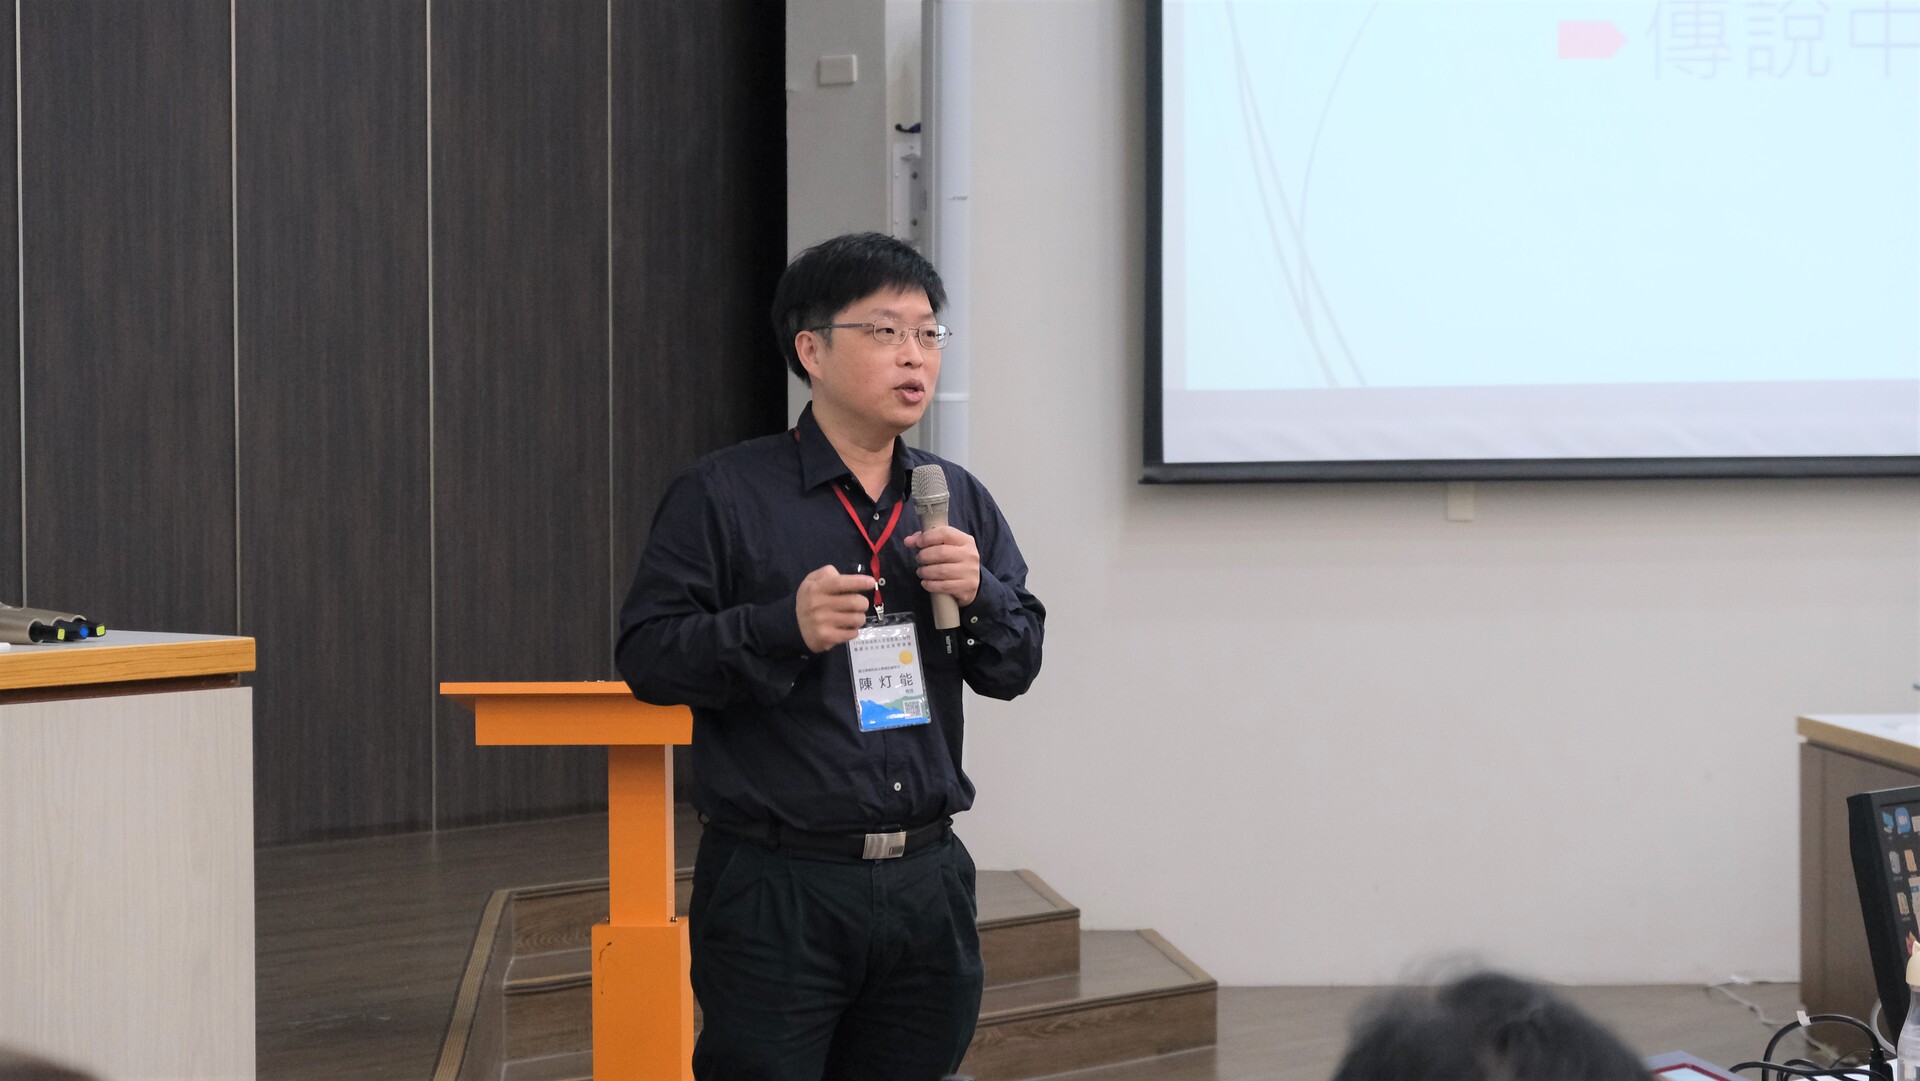 Professor Deng-Neng Chen of National Pingtung University of Science and Technology shared his memories of MOE Lifetime Chair Professor Ting-Peng Liang’s scholarship and altruism.